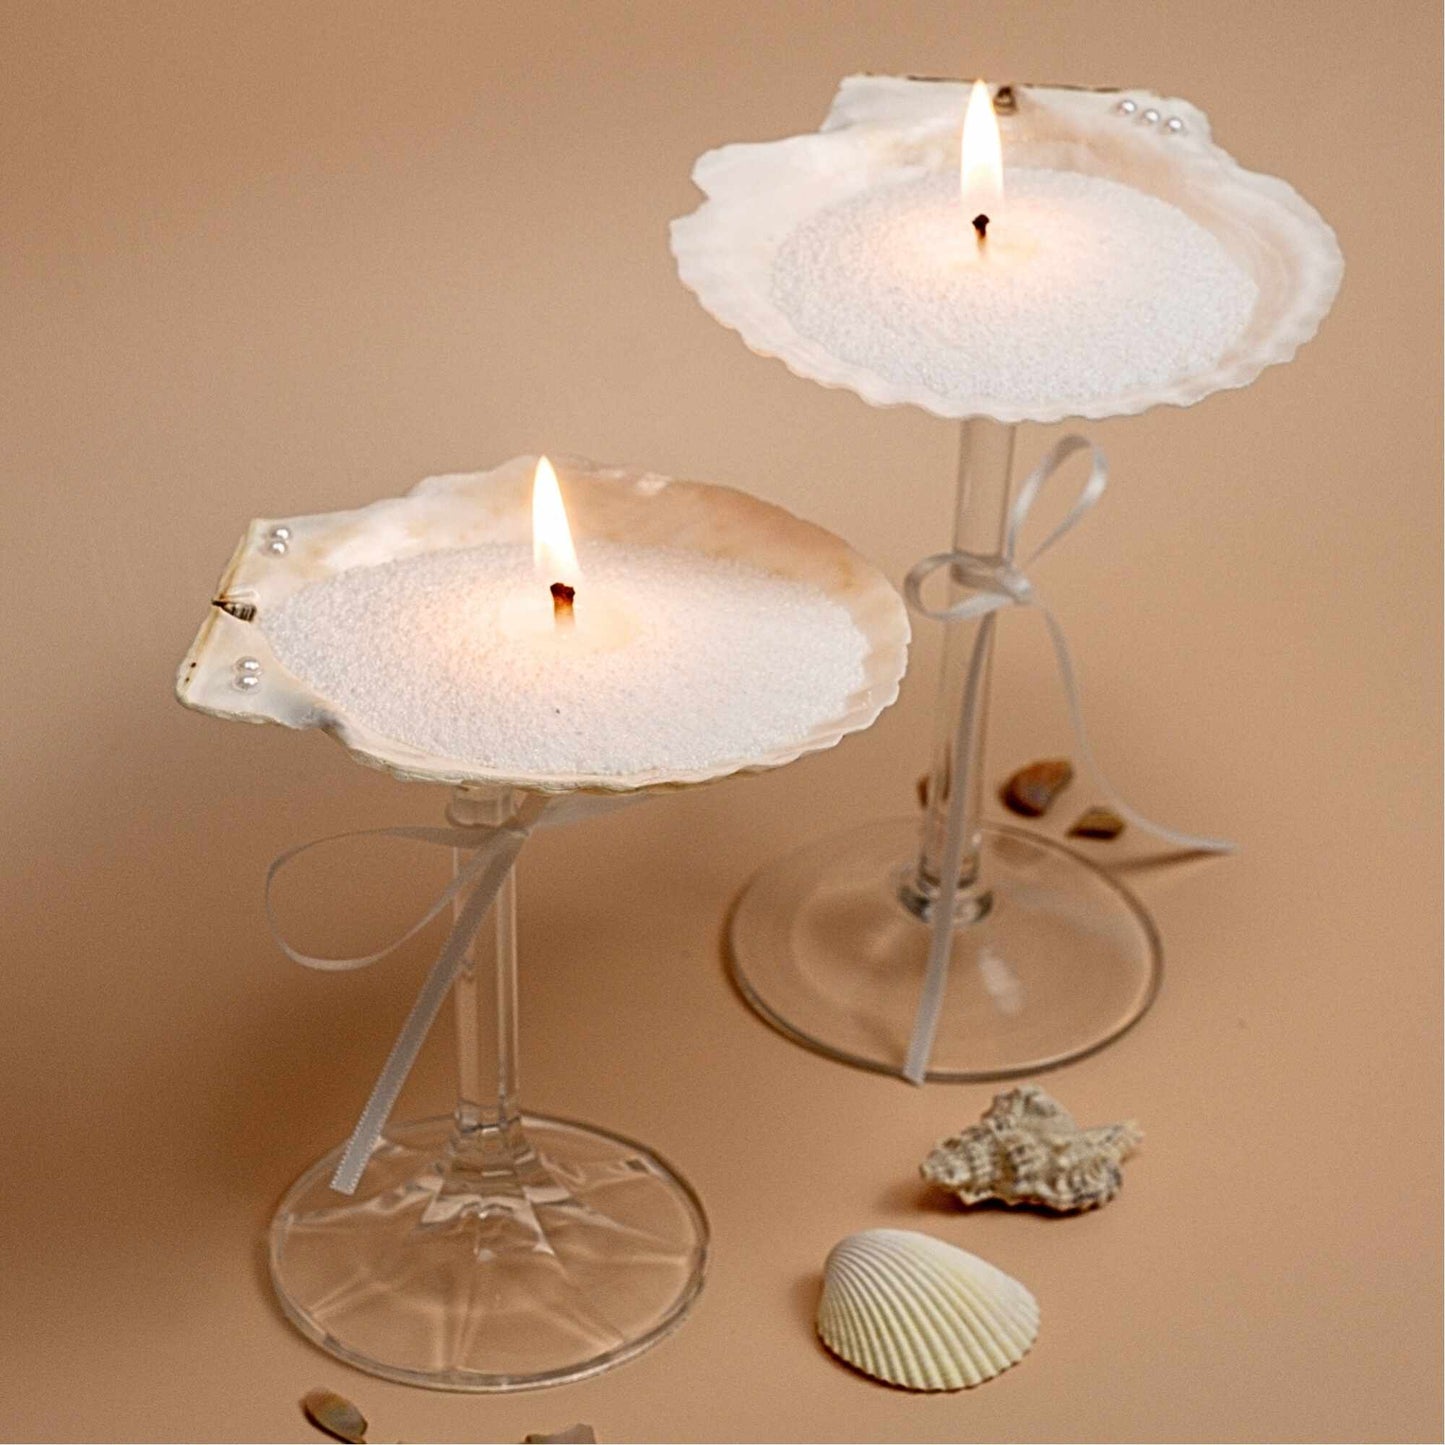 Candles lighting in a seashell martini, showcasing the versatility of sand candles.